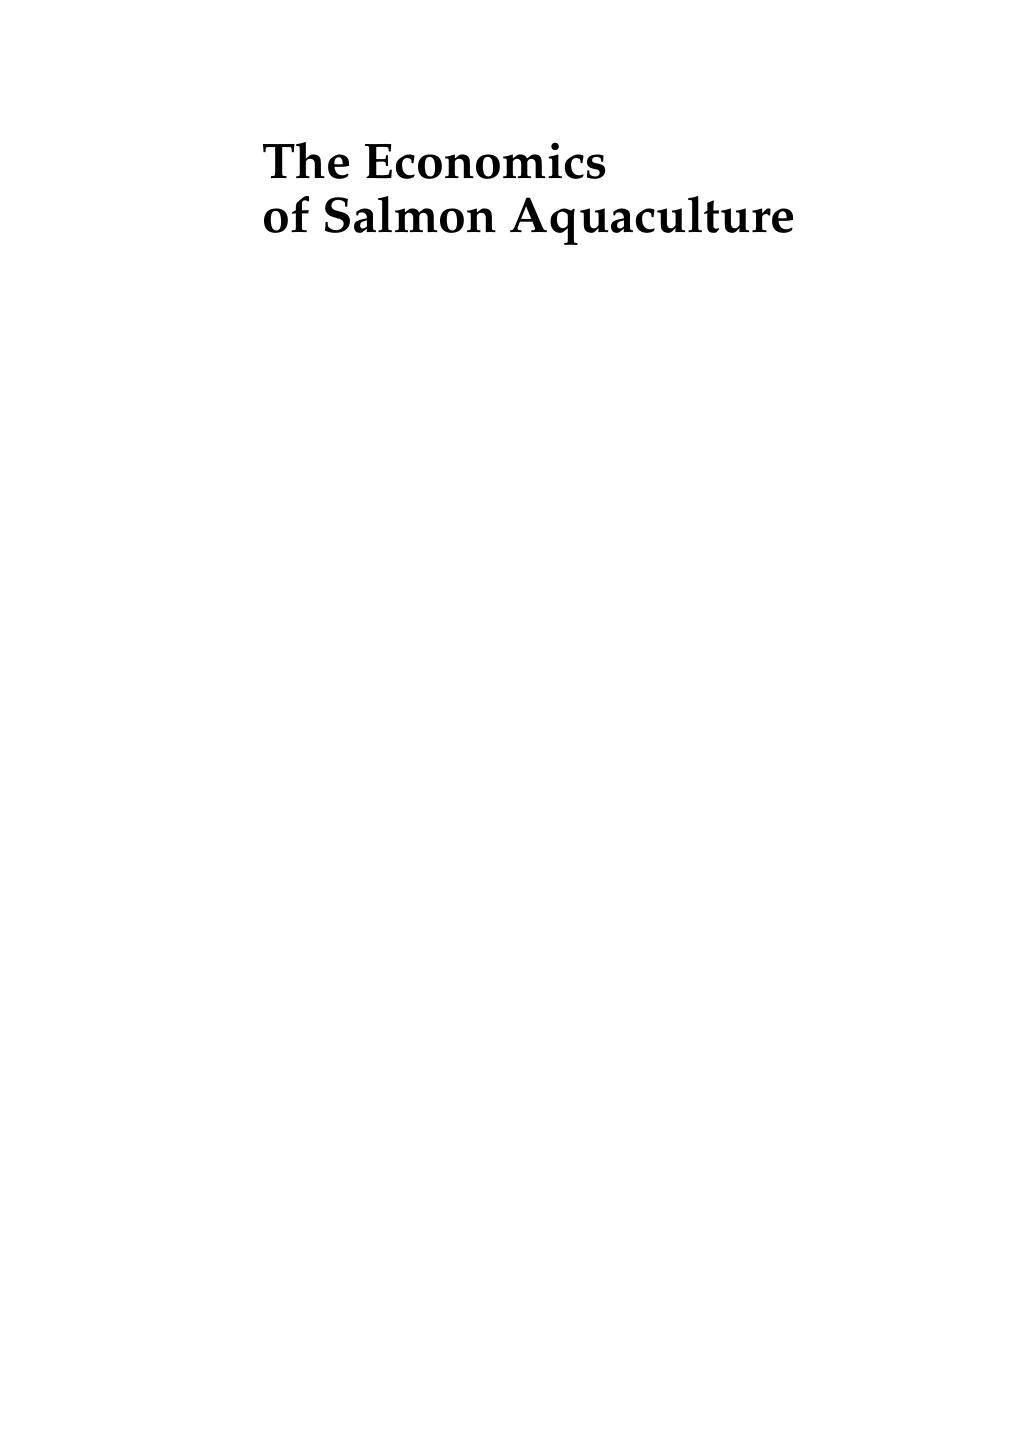 The Economics of Salmon Aquaculture, Second Edition-Wiley-Blackwell (2011)